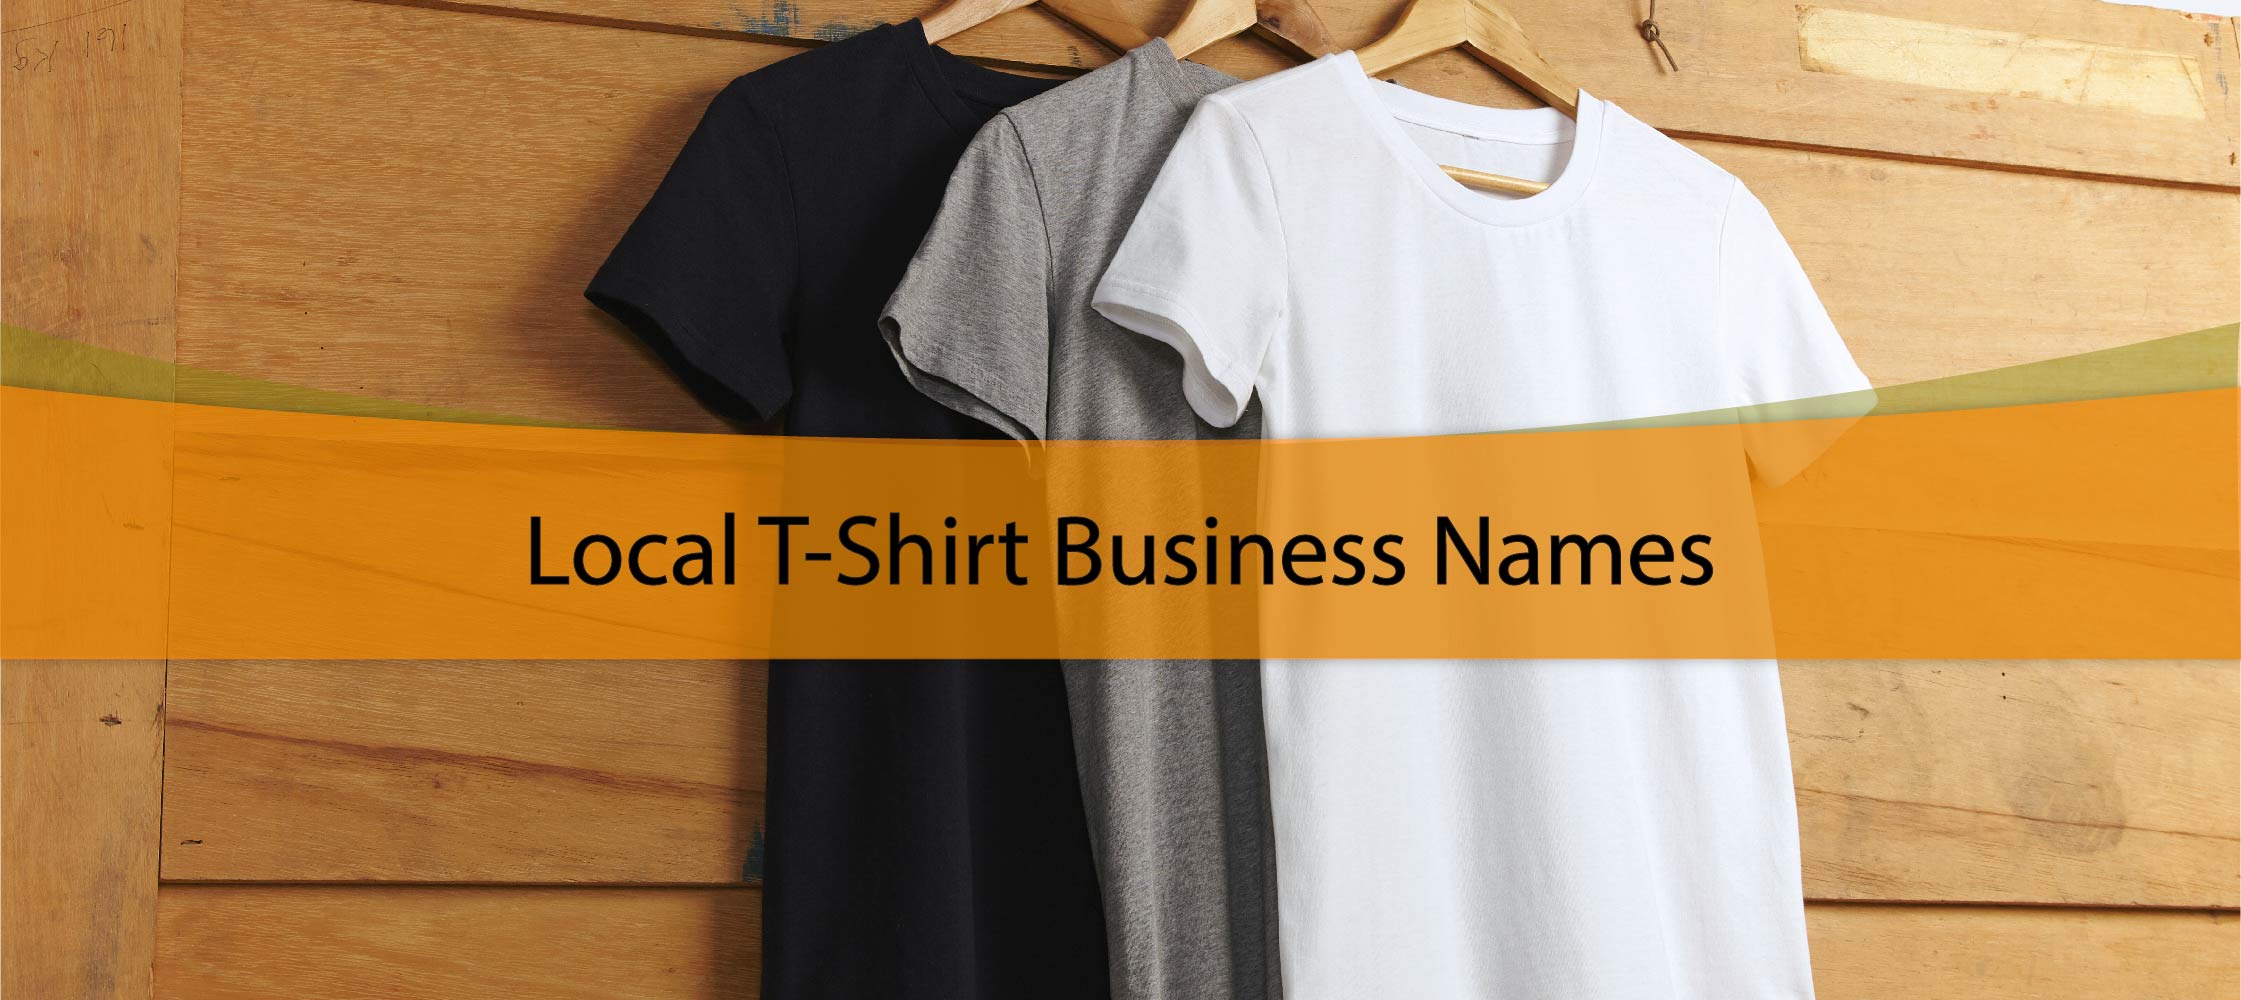 Local T-Shirt Business Names